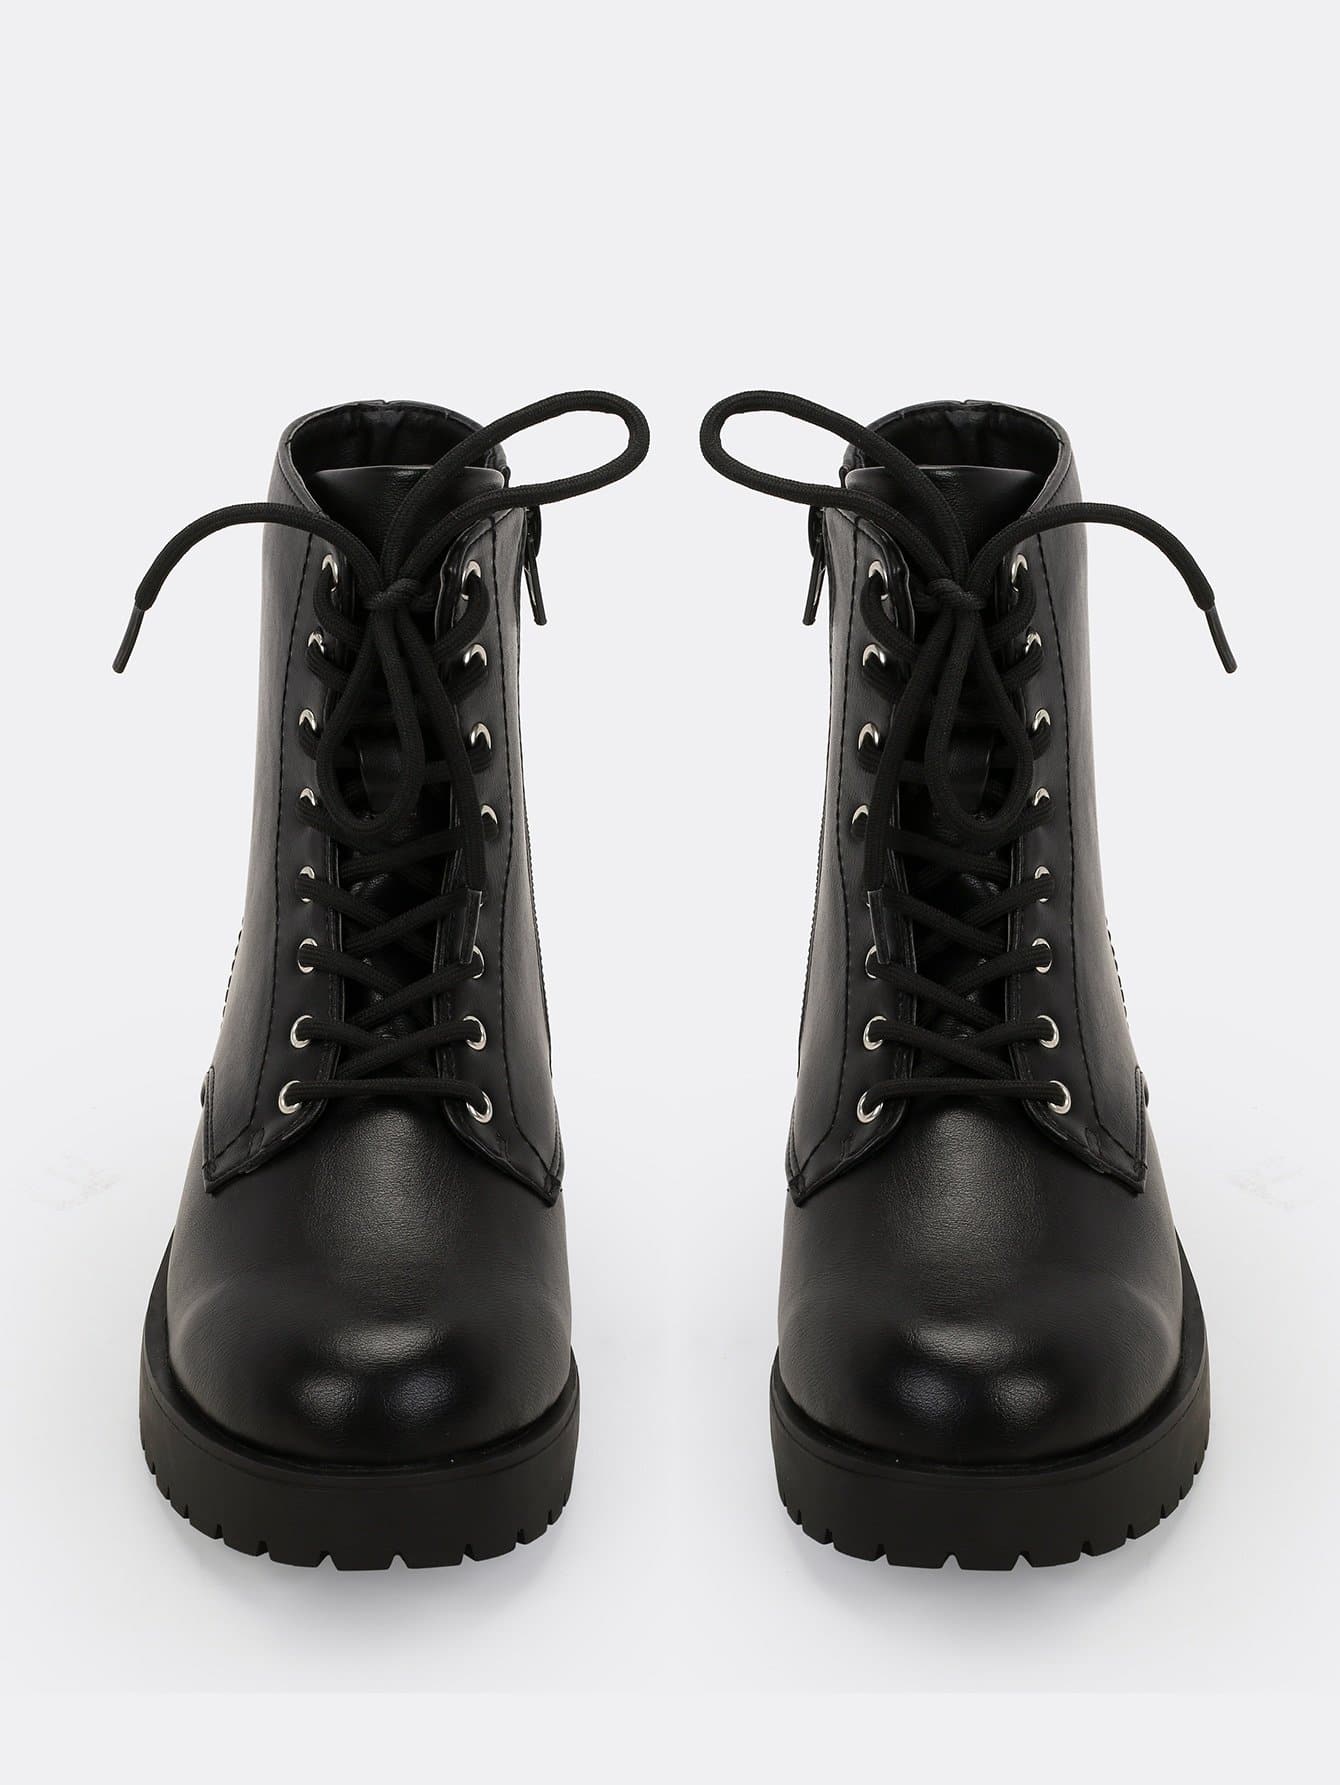 Crinkled Lace Front Lug Sole Combat Boots